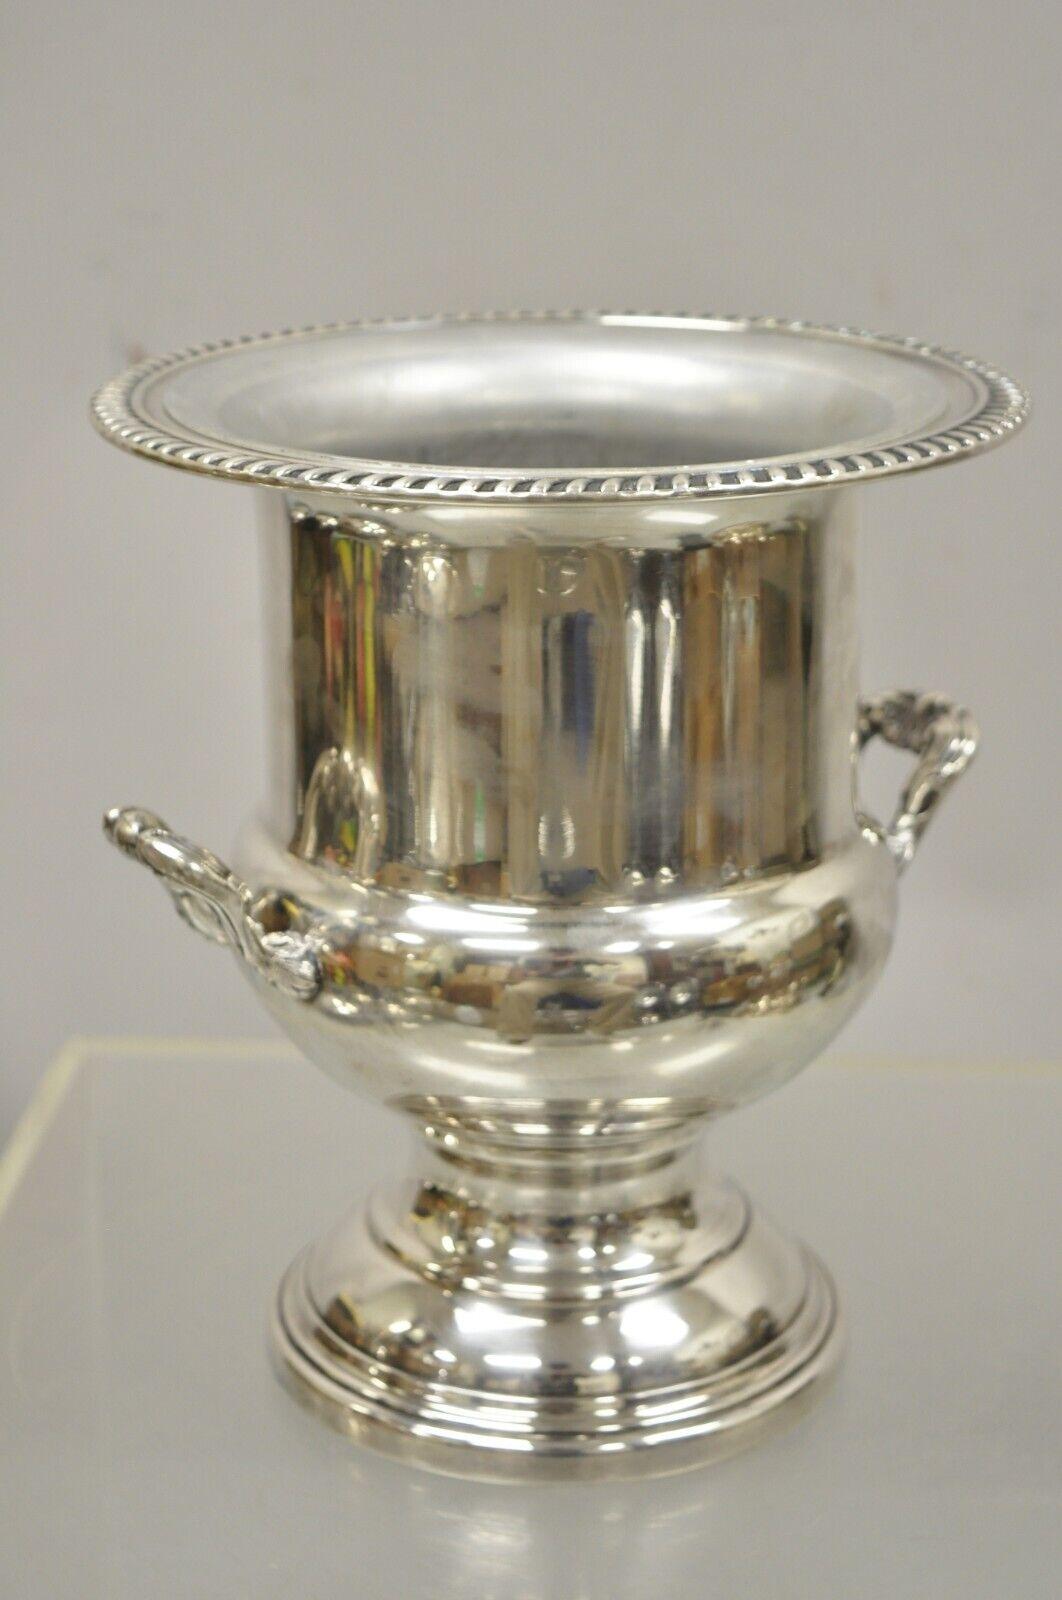 WMA Rogers Vintage Silver Plate Trophy Cup Urn Champagne Bucket Ice Chiller. Item features a removable liner, ornate handles, desirable trophy cup form, original stamp, very nice vintage item. Circa Mid 20th Century. Measurements: 10